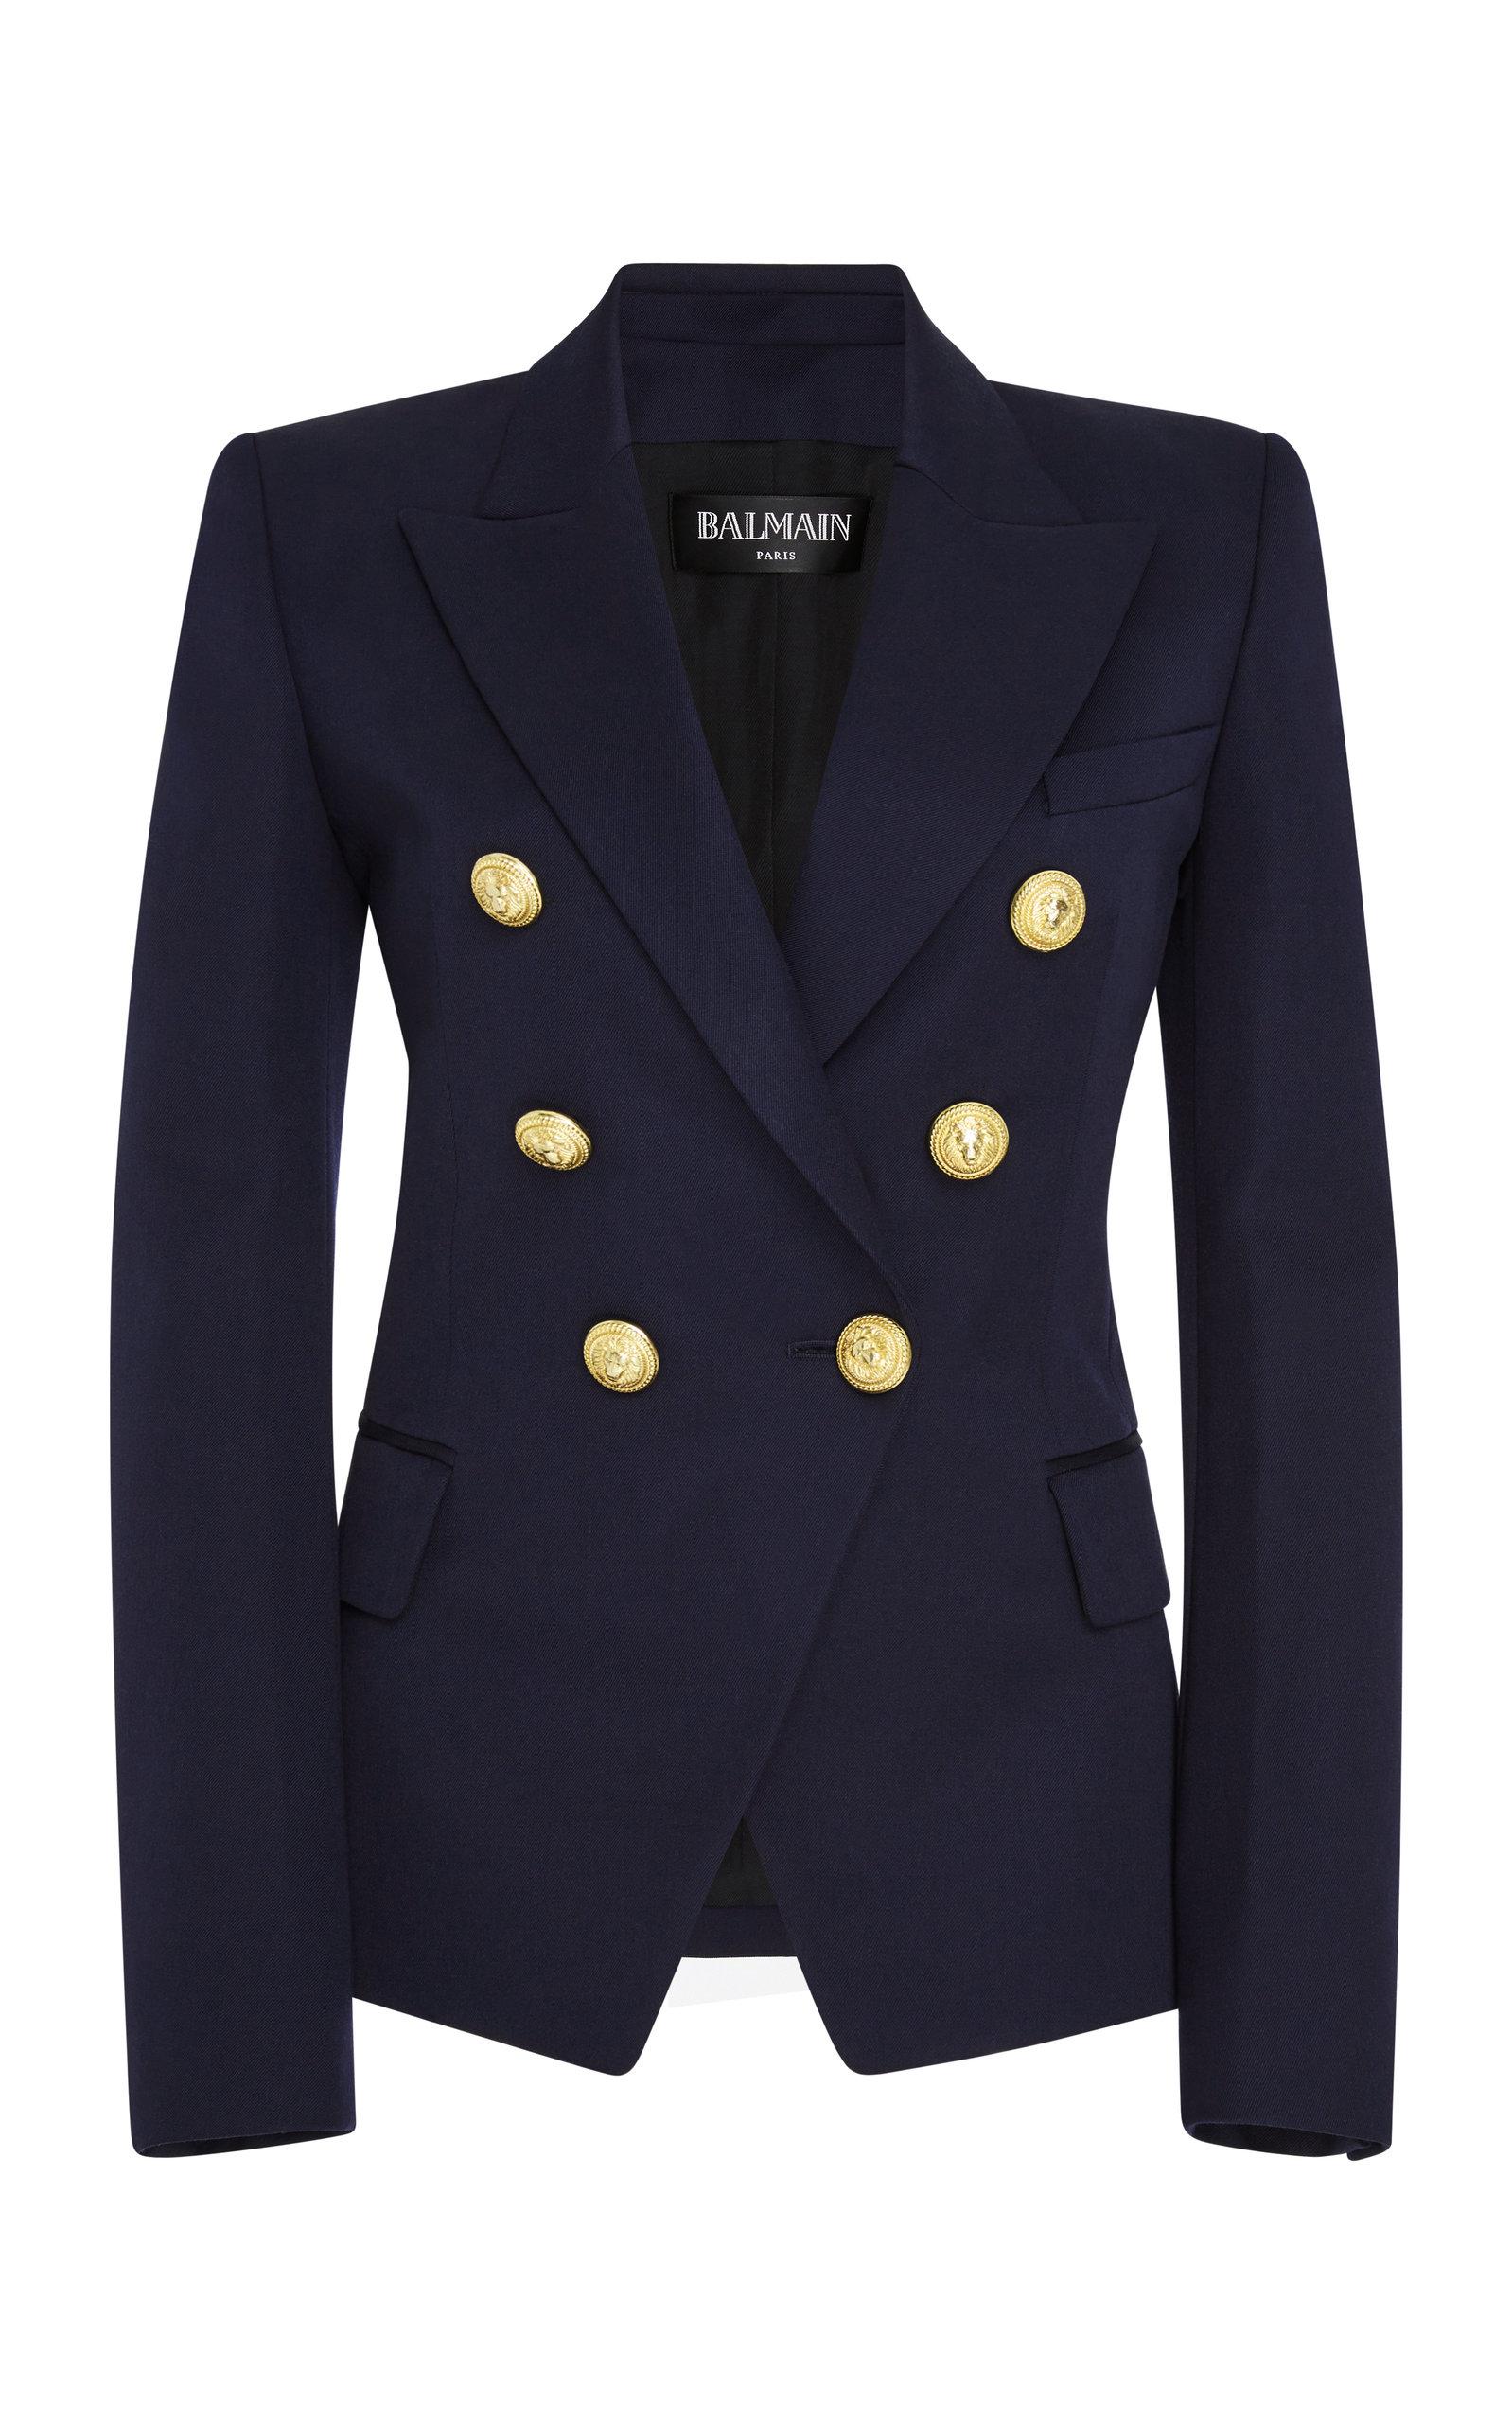 Balmain Tailored Double-breasted Wool Blazer in Navy (Blue) - Lyst